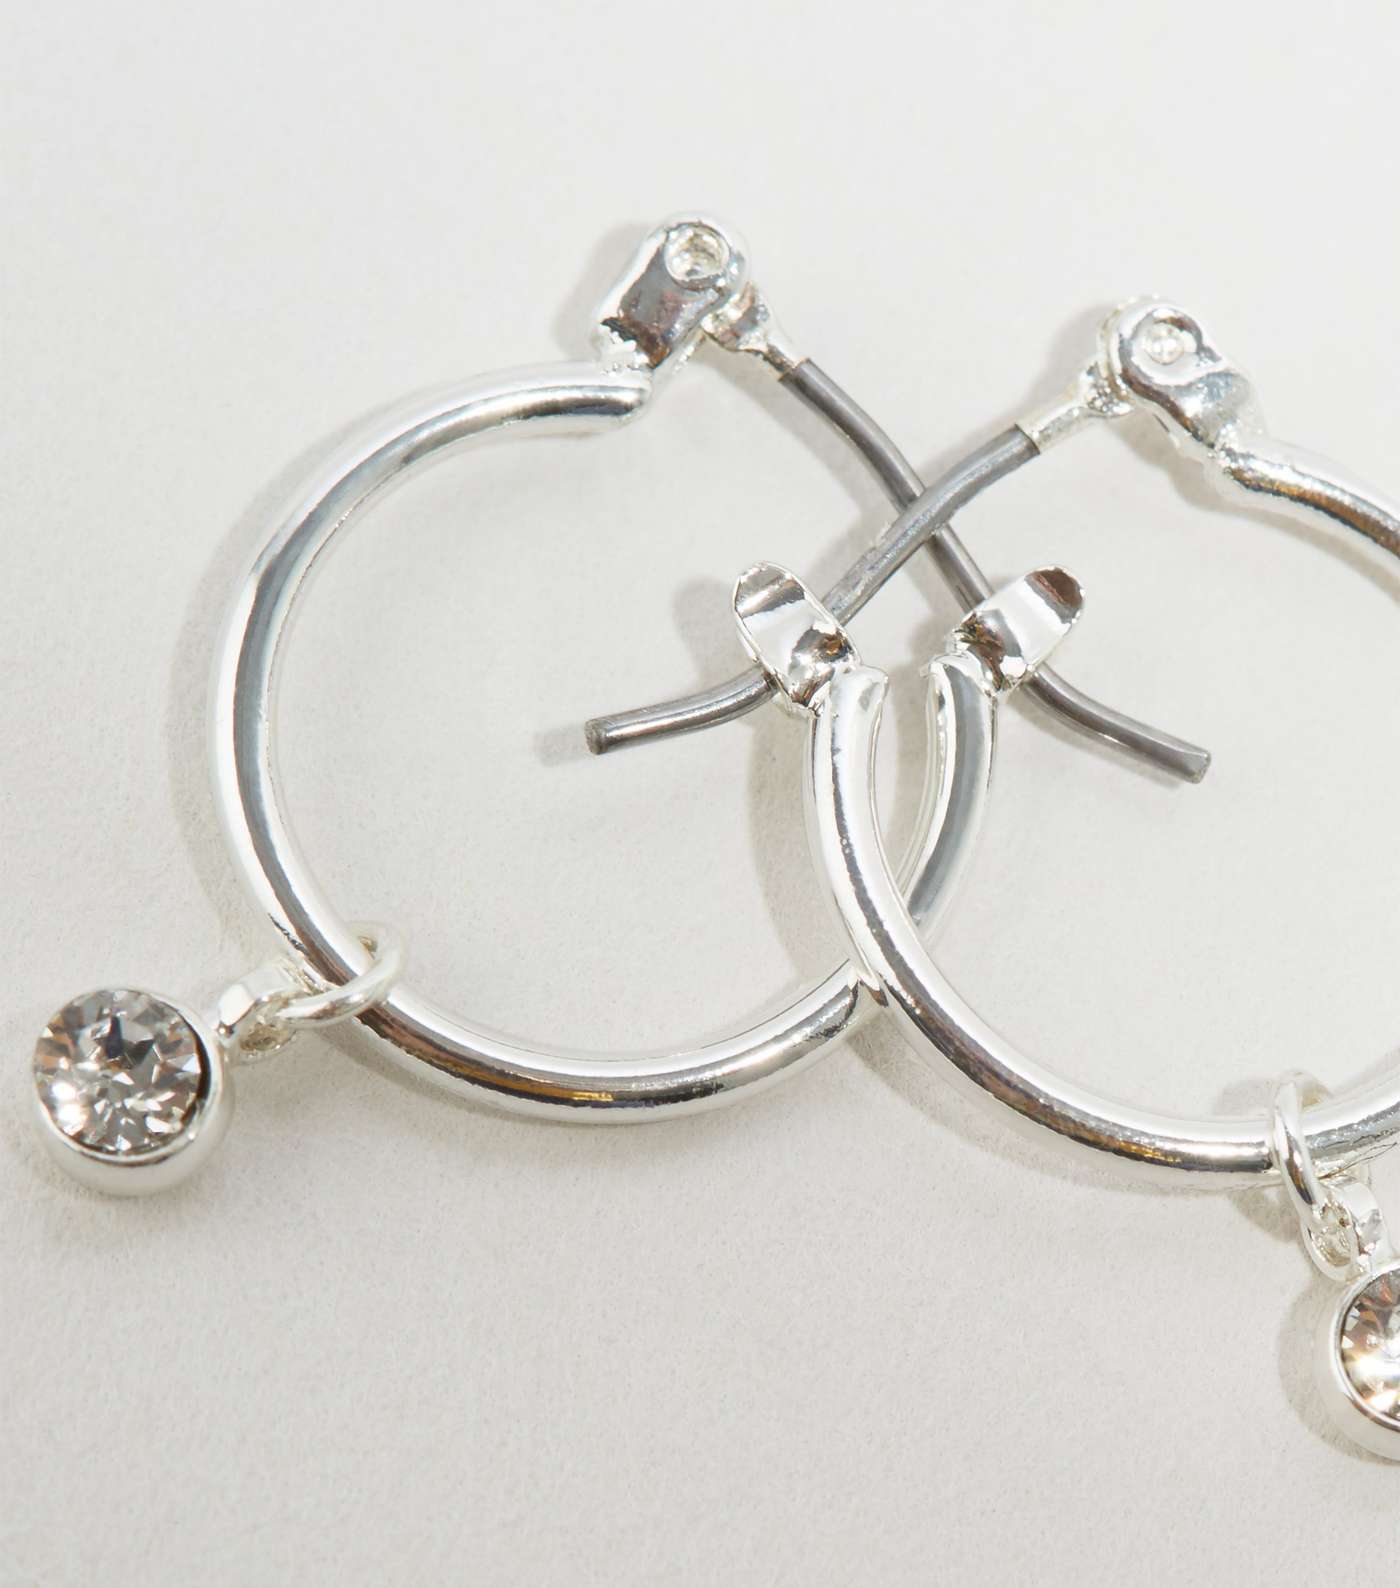 Silver Hoop Earrings with Crystals from Swarovski® Image 3